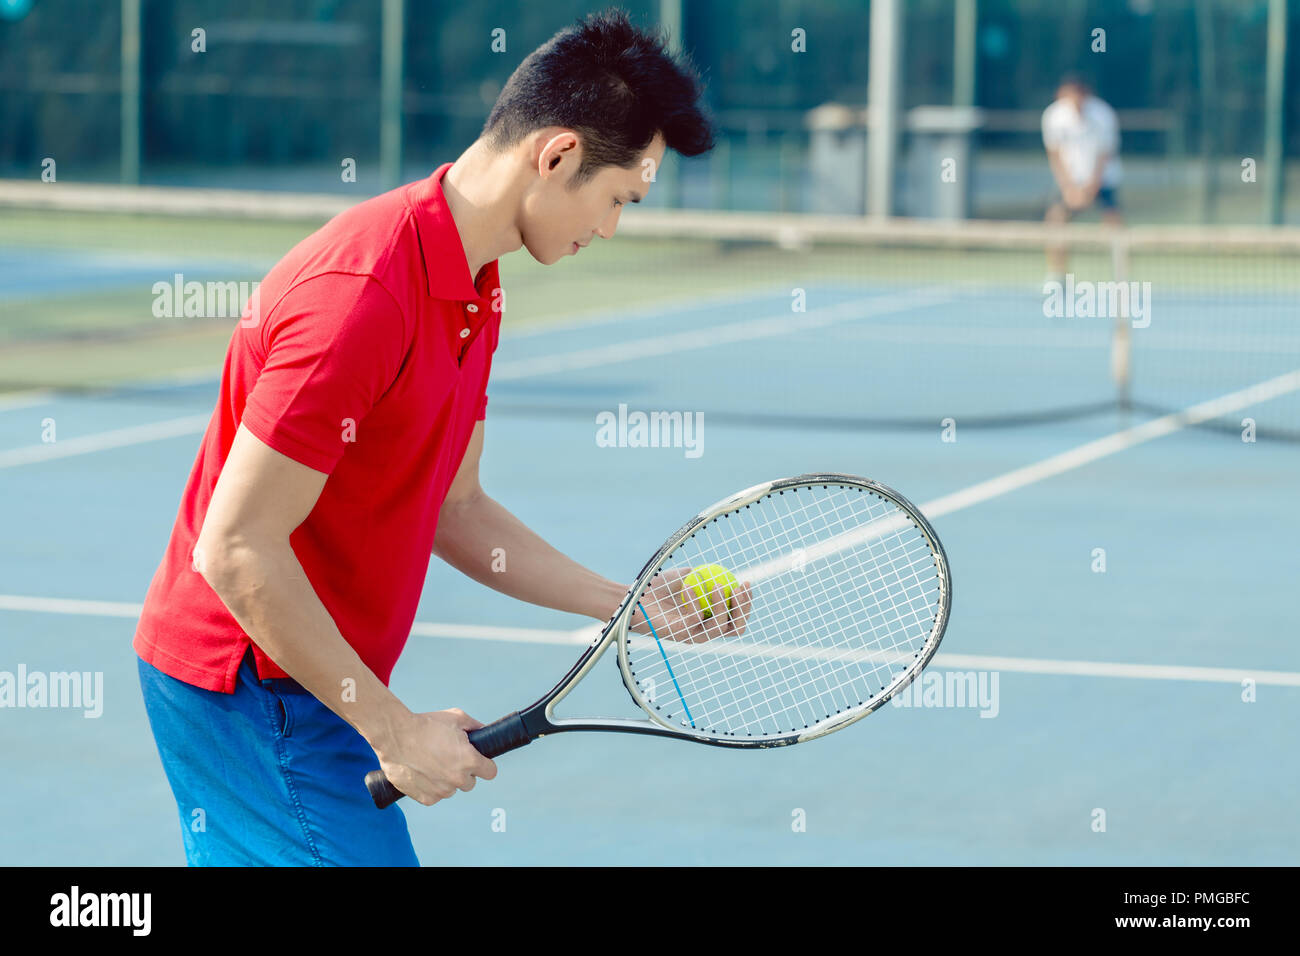 Asian tennis player looking at the ball with concentration before serving Stock Photo